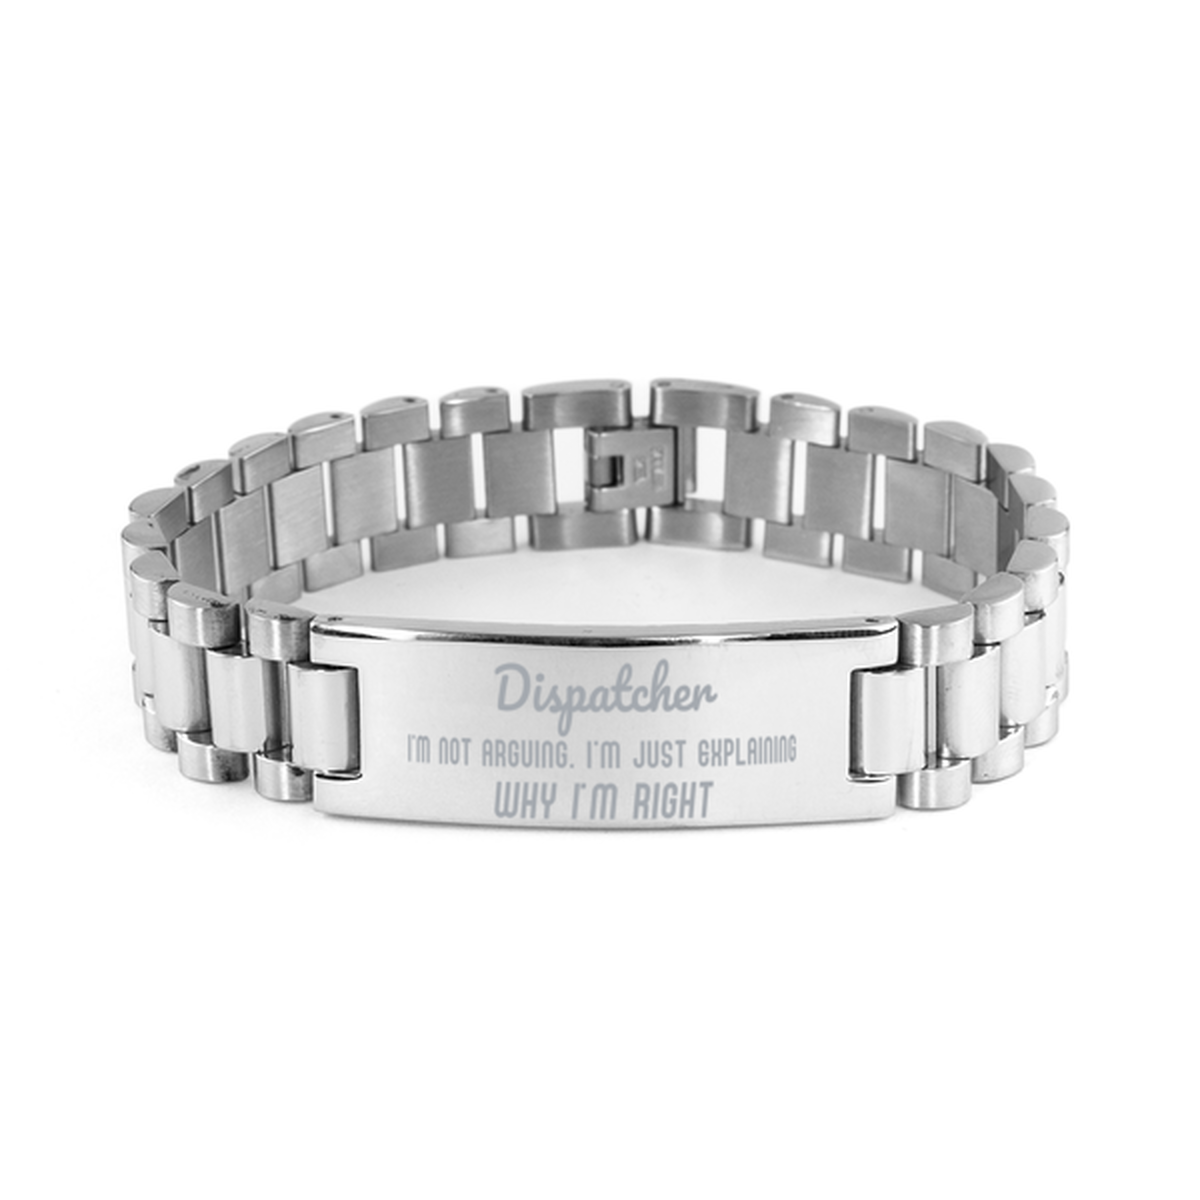 Dispatcher I'm not Arguing. I'm Just Explaining Why I'm RIGHT Ladder Stainless Steel Bracelet, Graduation Birthday Christmas Dispatcher Gifts For Dispatcher Funny Saying Quote Present for Men Women Coworker